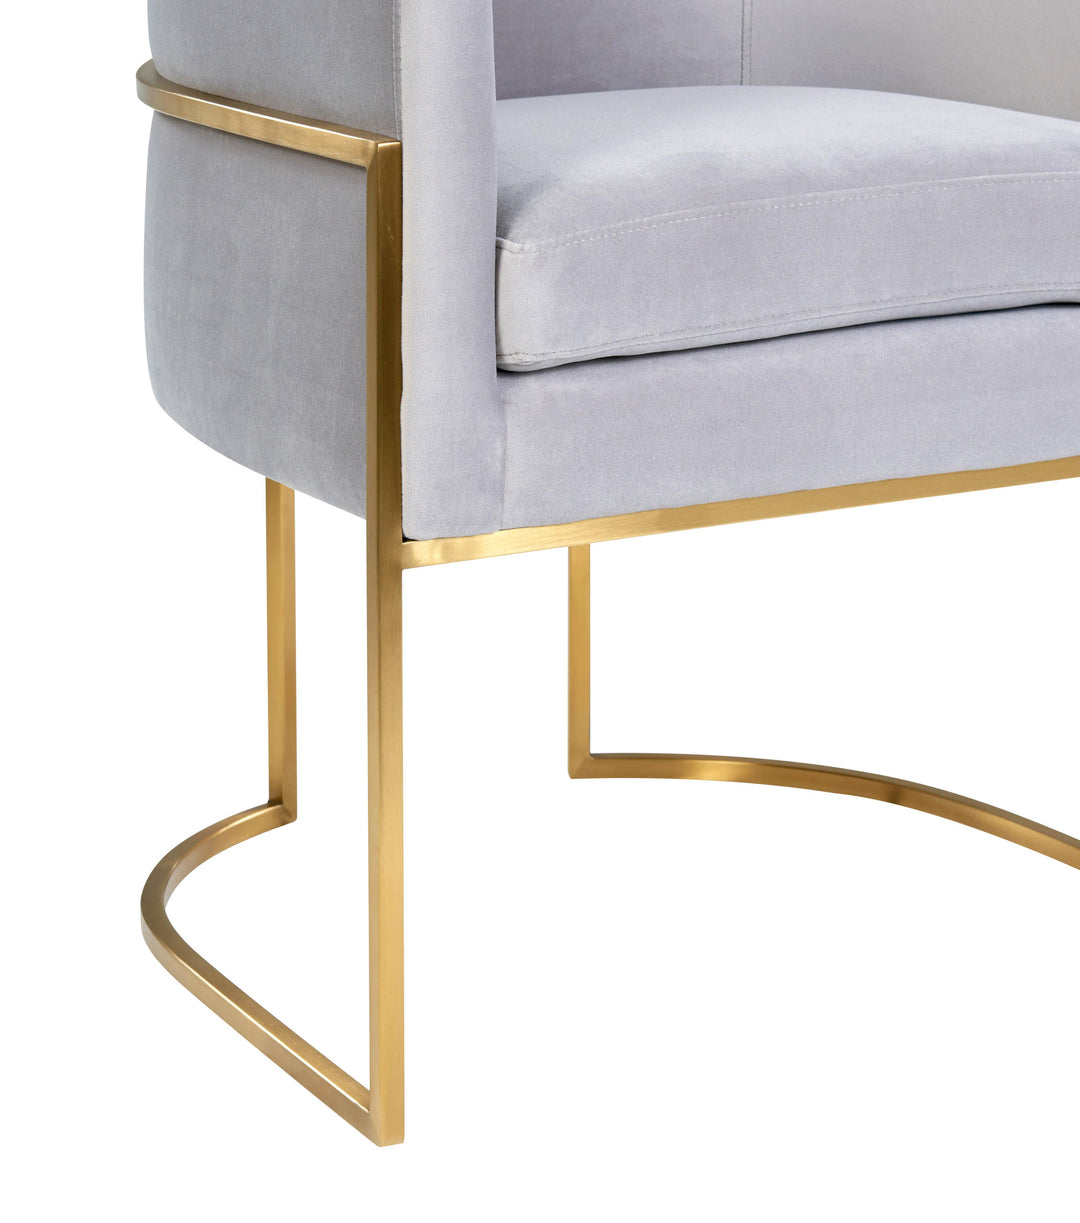 American Home Furniture | TOV Furniture - Giselle Grey Velvet Dining Chair with Gold Leg